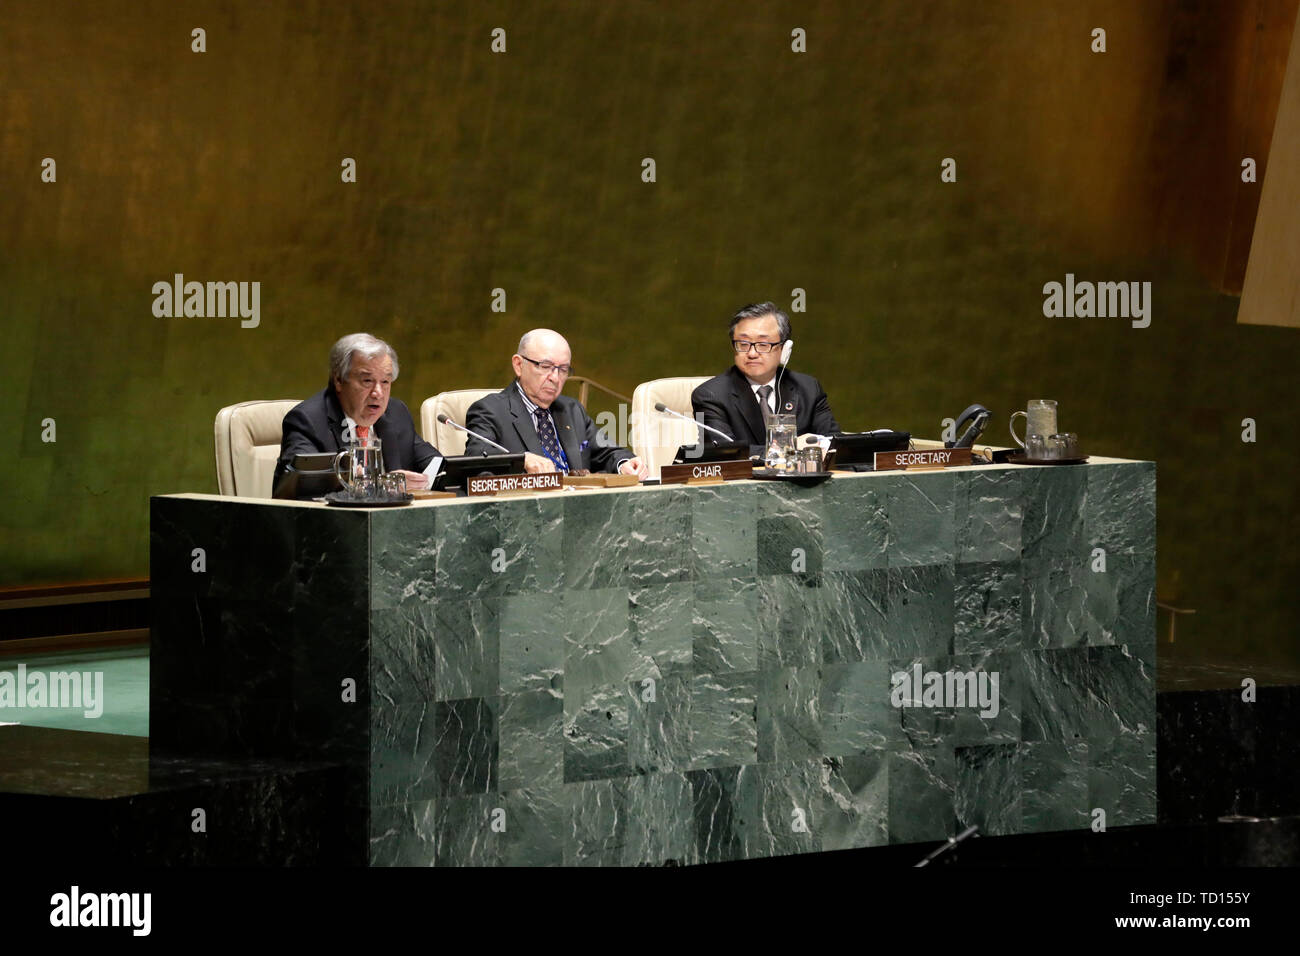 United Nations. 11th June, 2019. UN Secretary-General Antonio Guterres (L) addresses the 12th Session of the Conference of States Parties to the Convention on the Rights of Persons with Disabilities at the UN headquarters in New York, on June 11, 2019. The acting chair of Committee on the Rights of Persons with Disabilities said on Tuesday that due to cash flow difficulties United Nations is facing, sessions of six of the ten UN human rights treaty bodies will be cancelled. Credit: Li Muzi/Xinhua/Alamy Live News Stock Photo